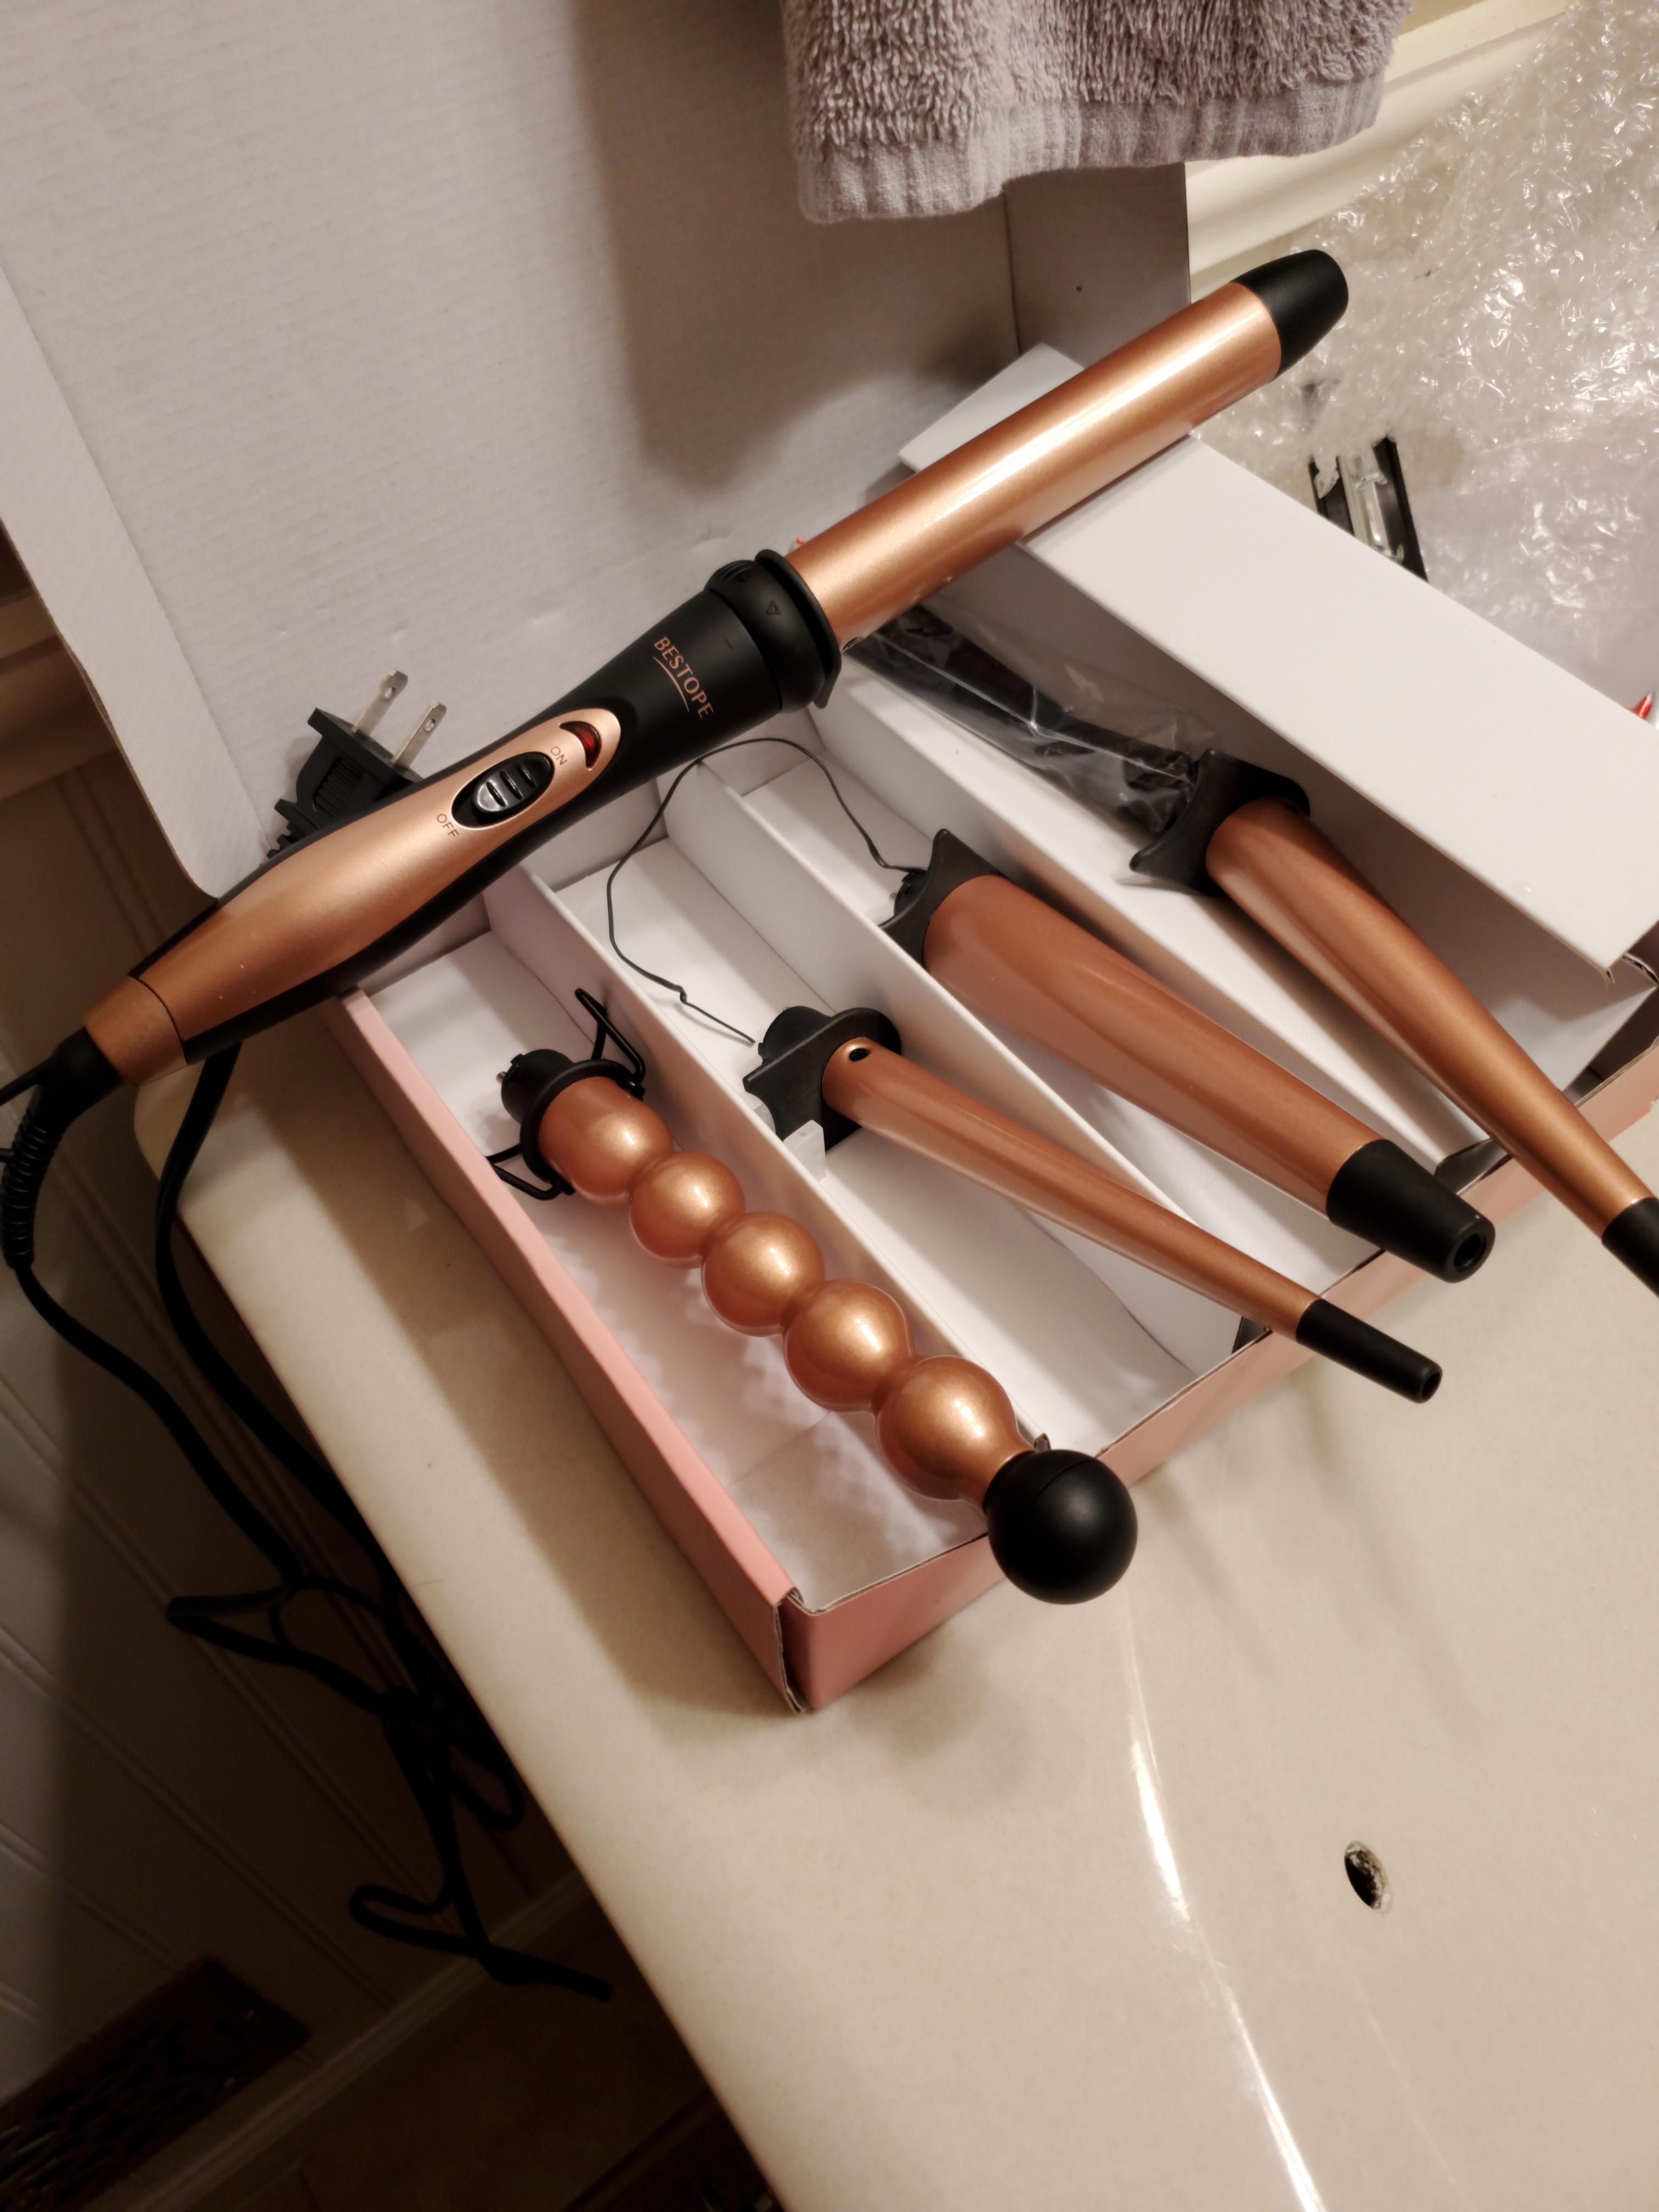 My wife bought a new curling iron I think.